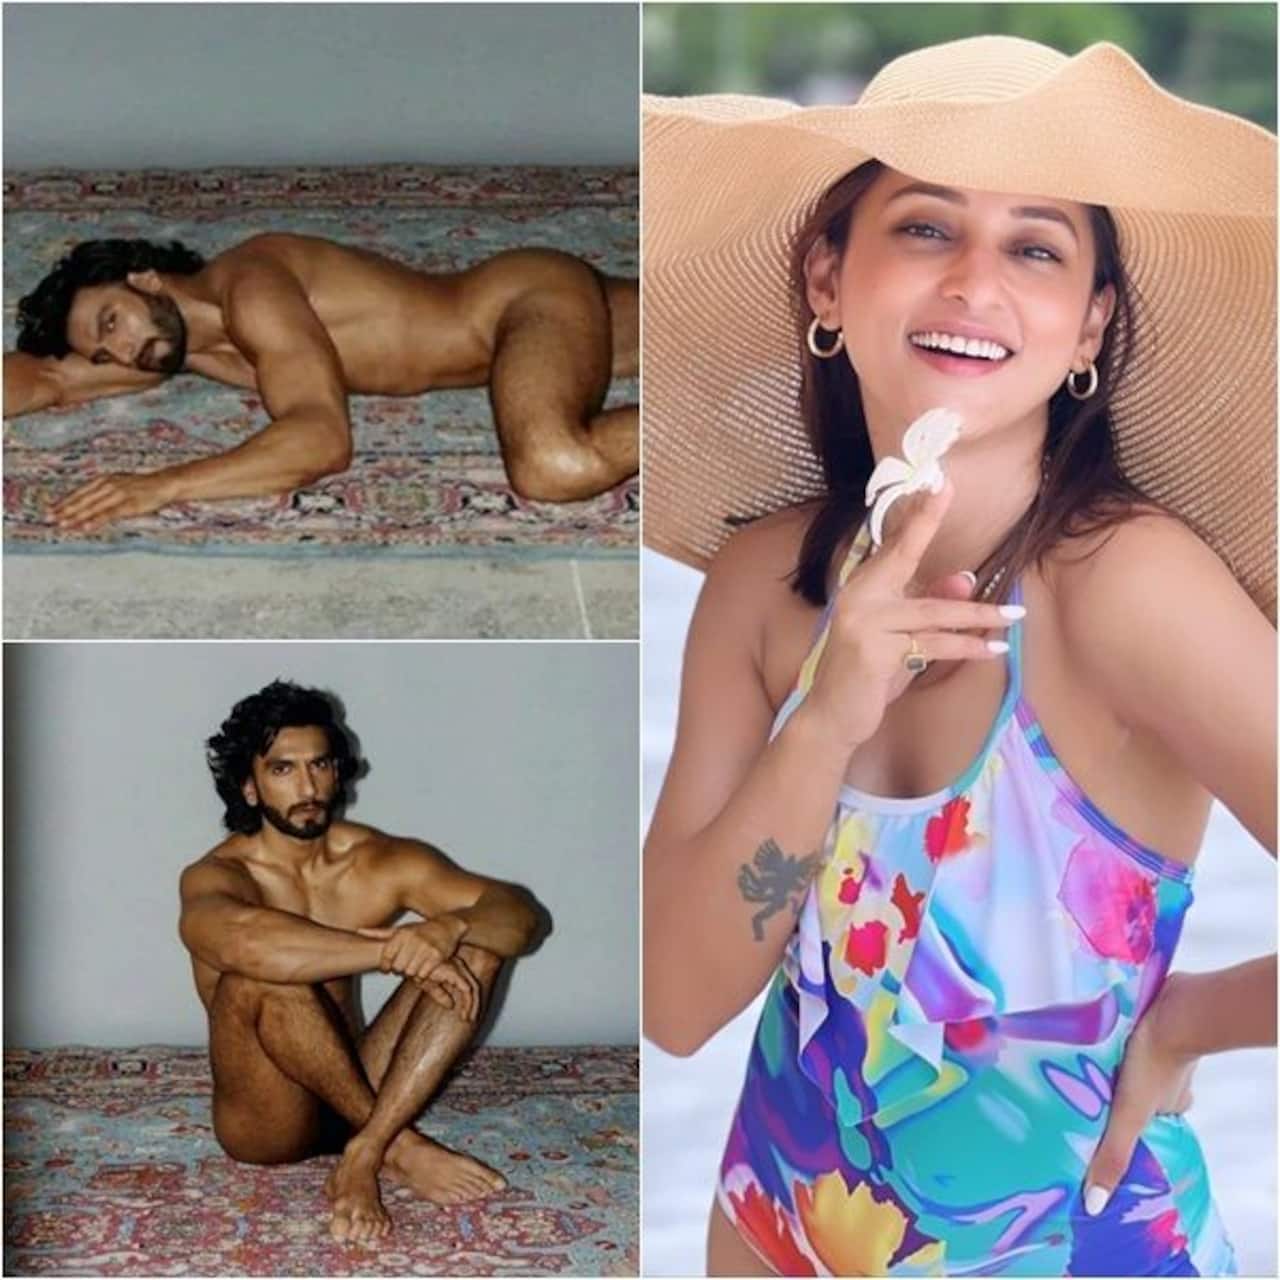 Ranveer Singh's nude photoshoot gets questioned by Bengali actress-politician Mimi Chakraborty; asks, 'What if she was a woman'